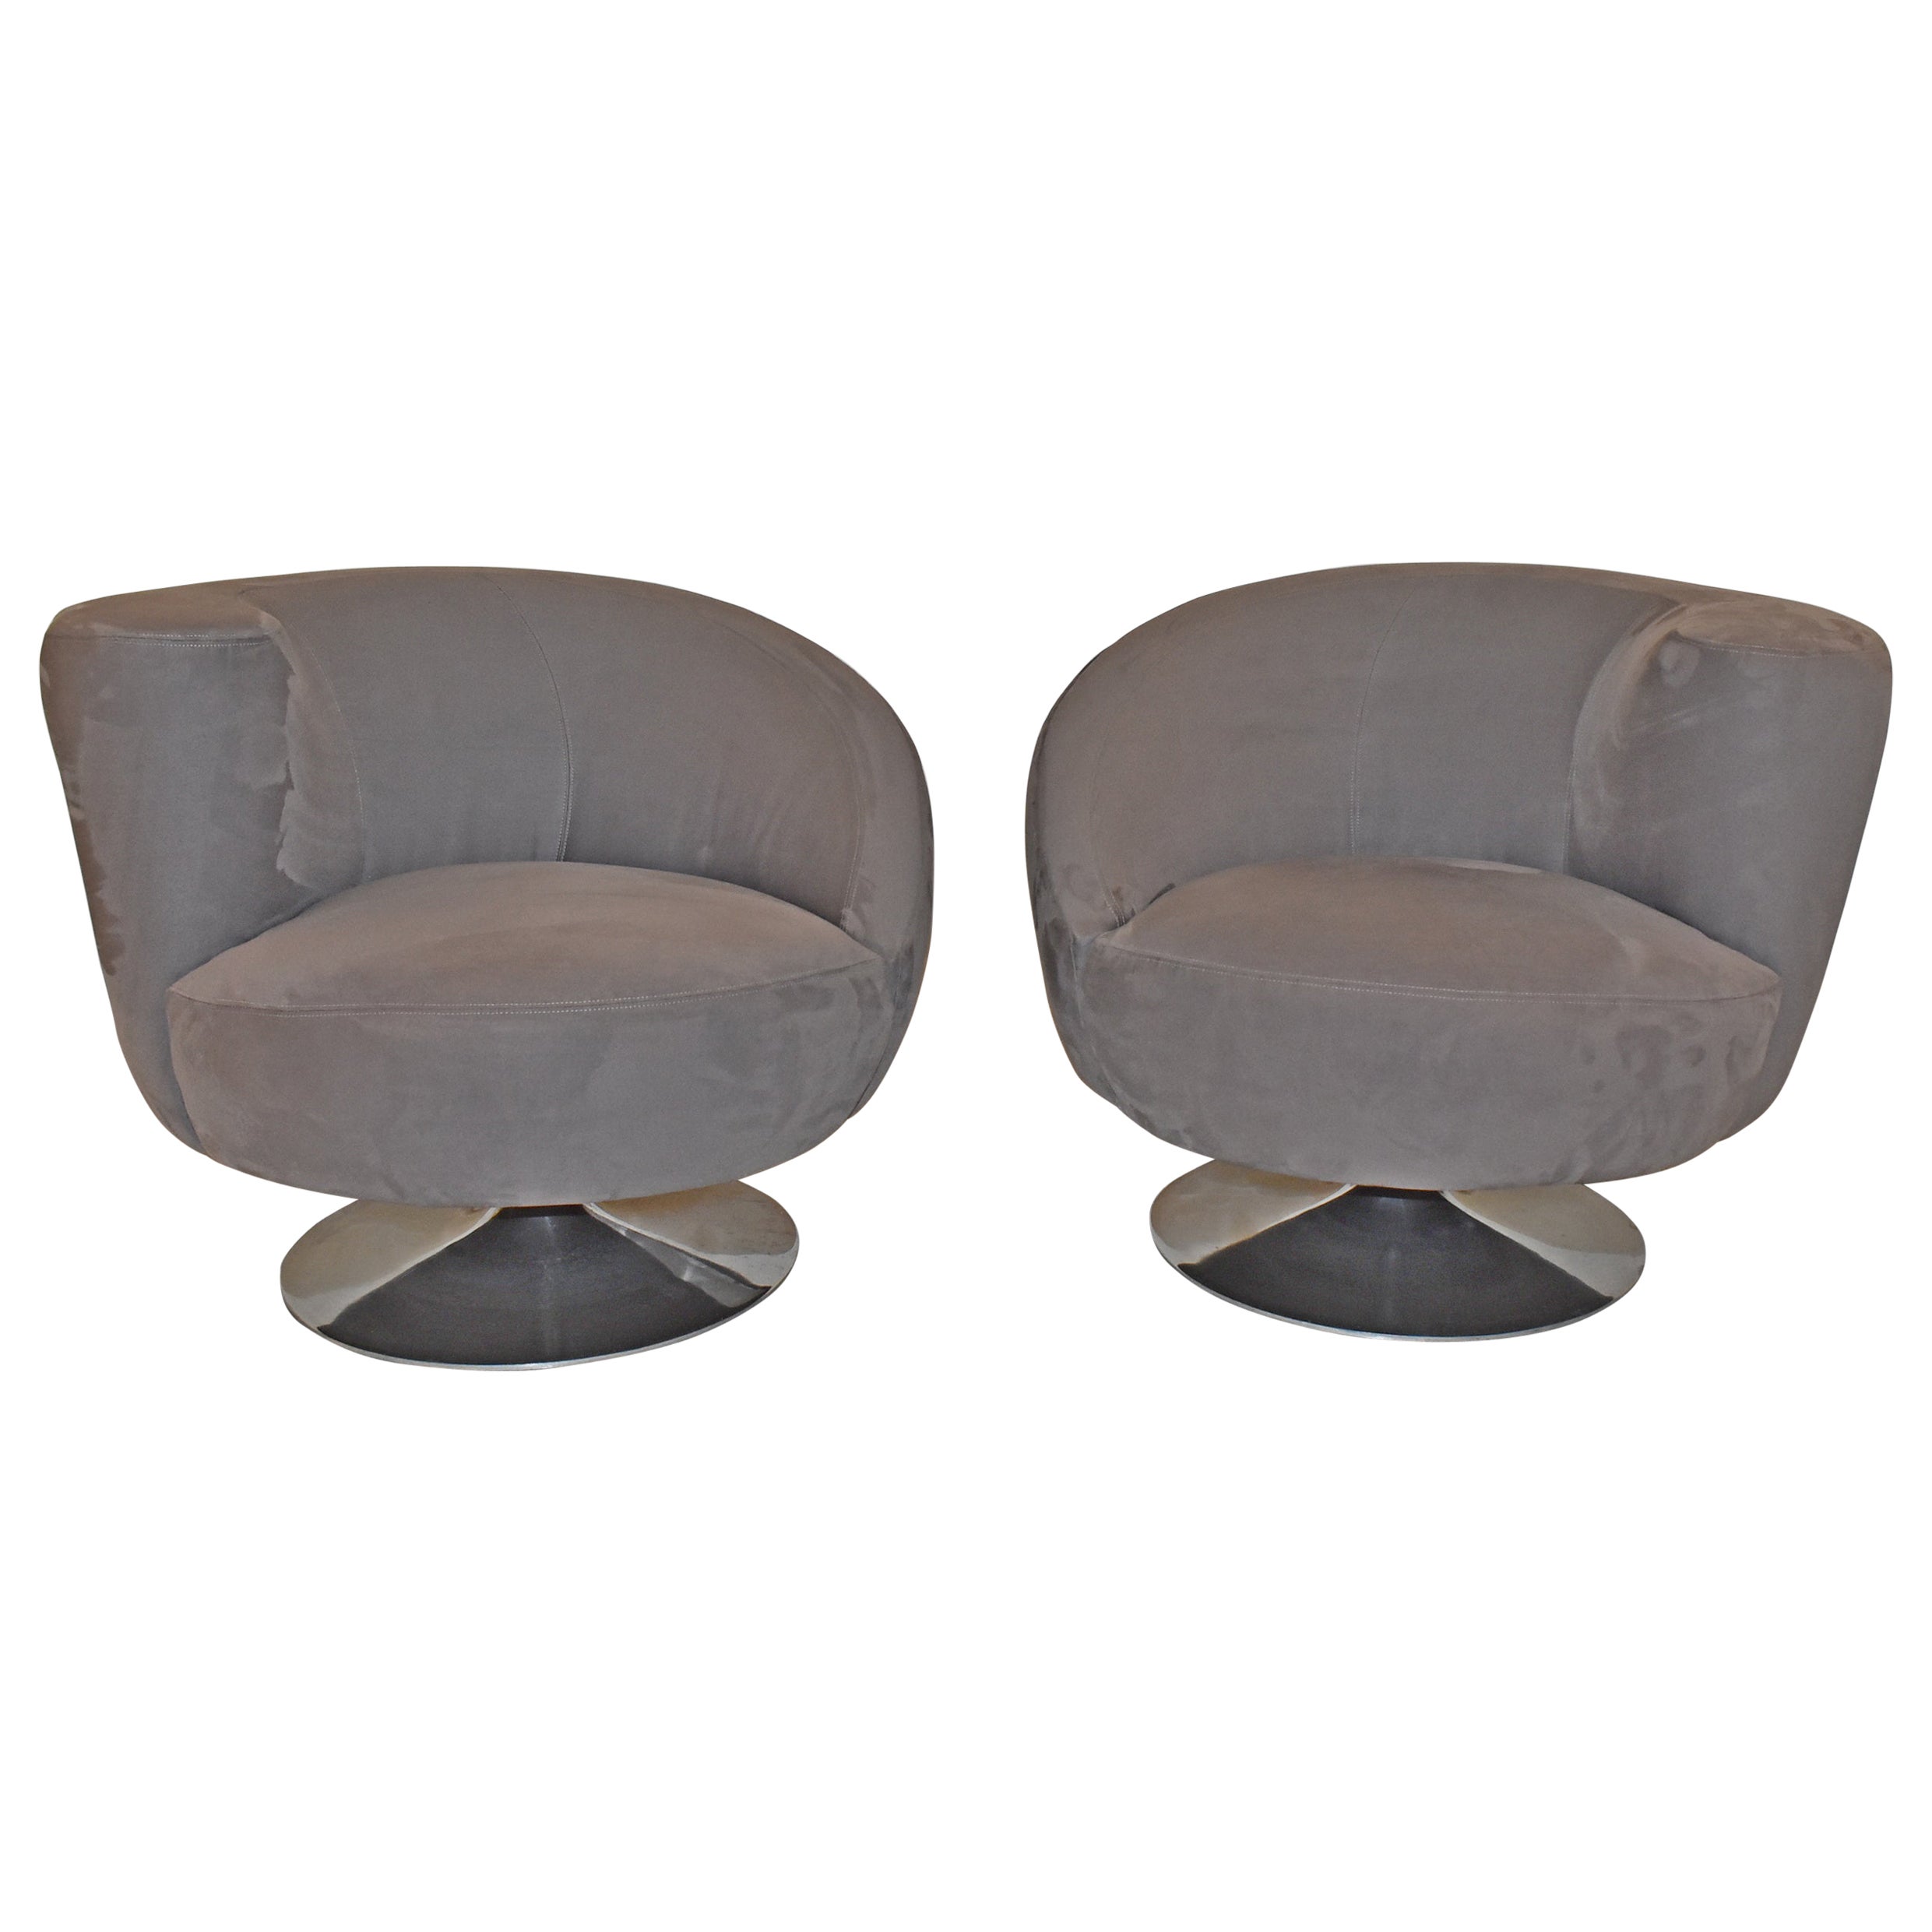 Lazar Spiral Swivel Chairs with Chrome Base For Sale